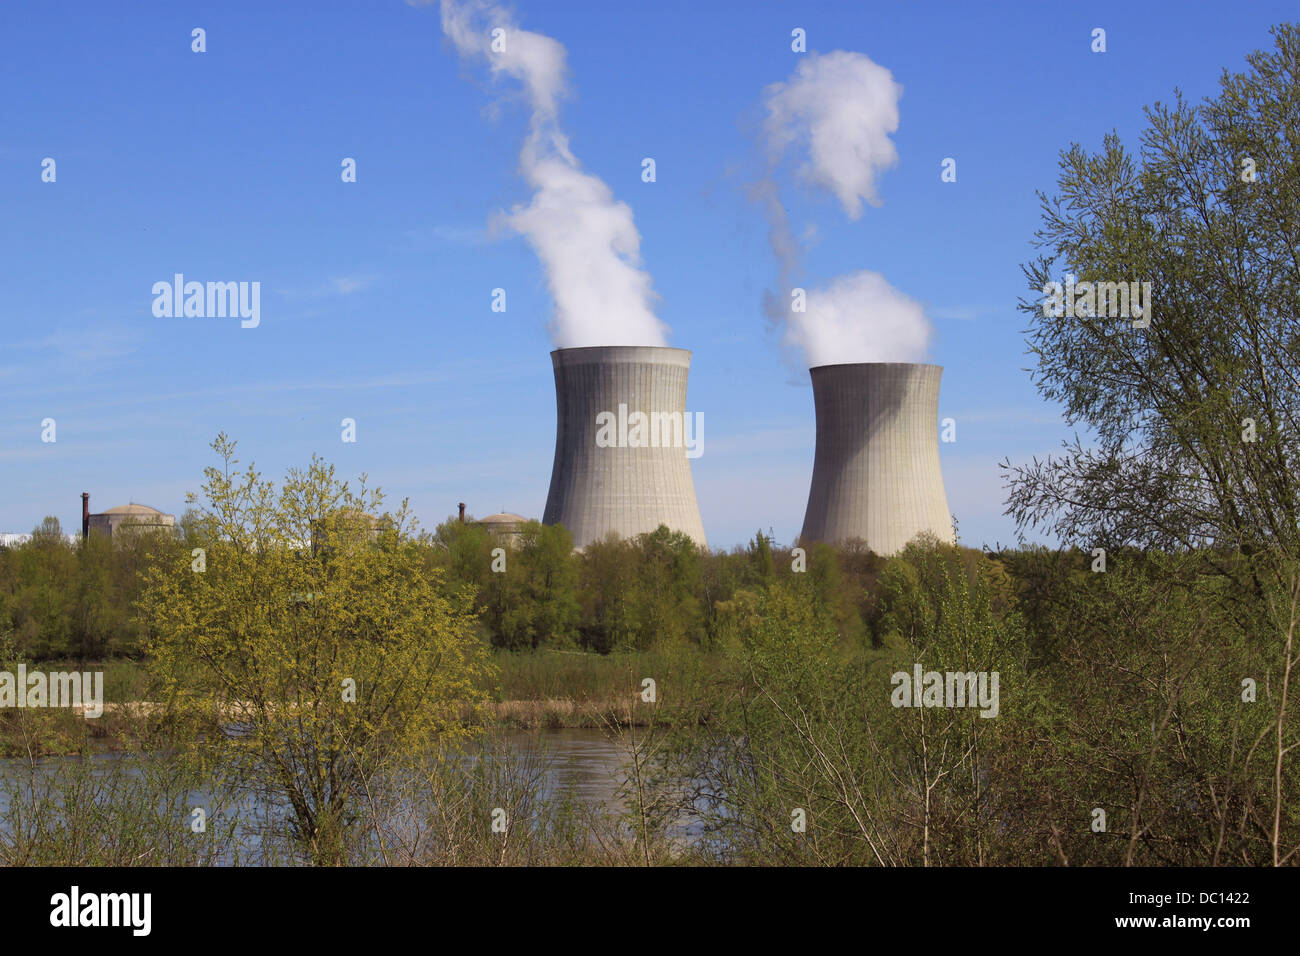 photo of an operating nuclear power plant on the banks of a river surrounded by trees Stock Photo